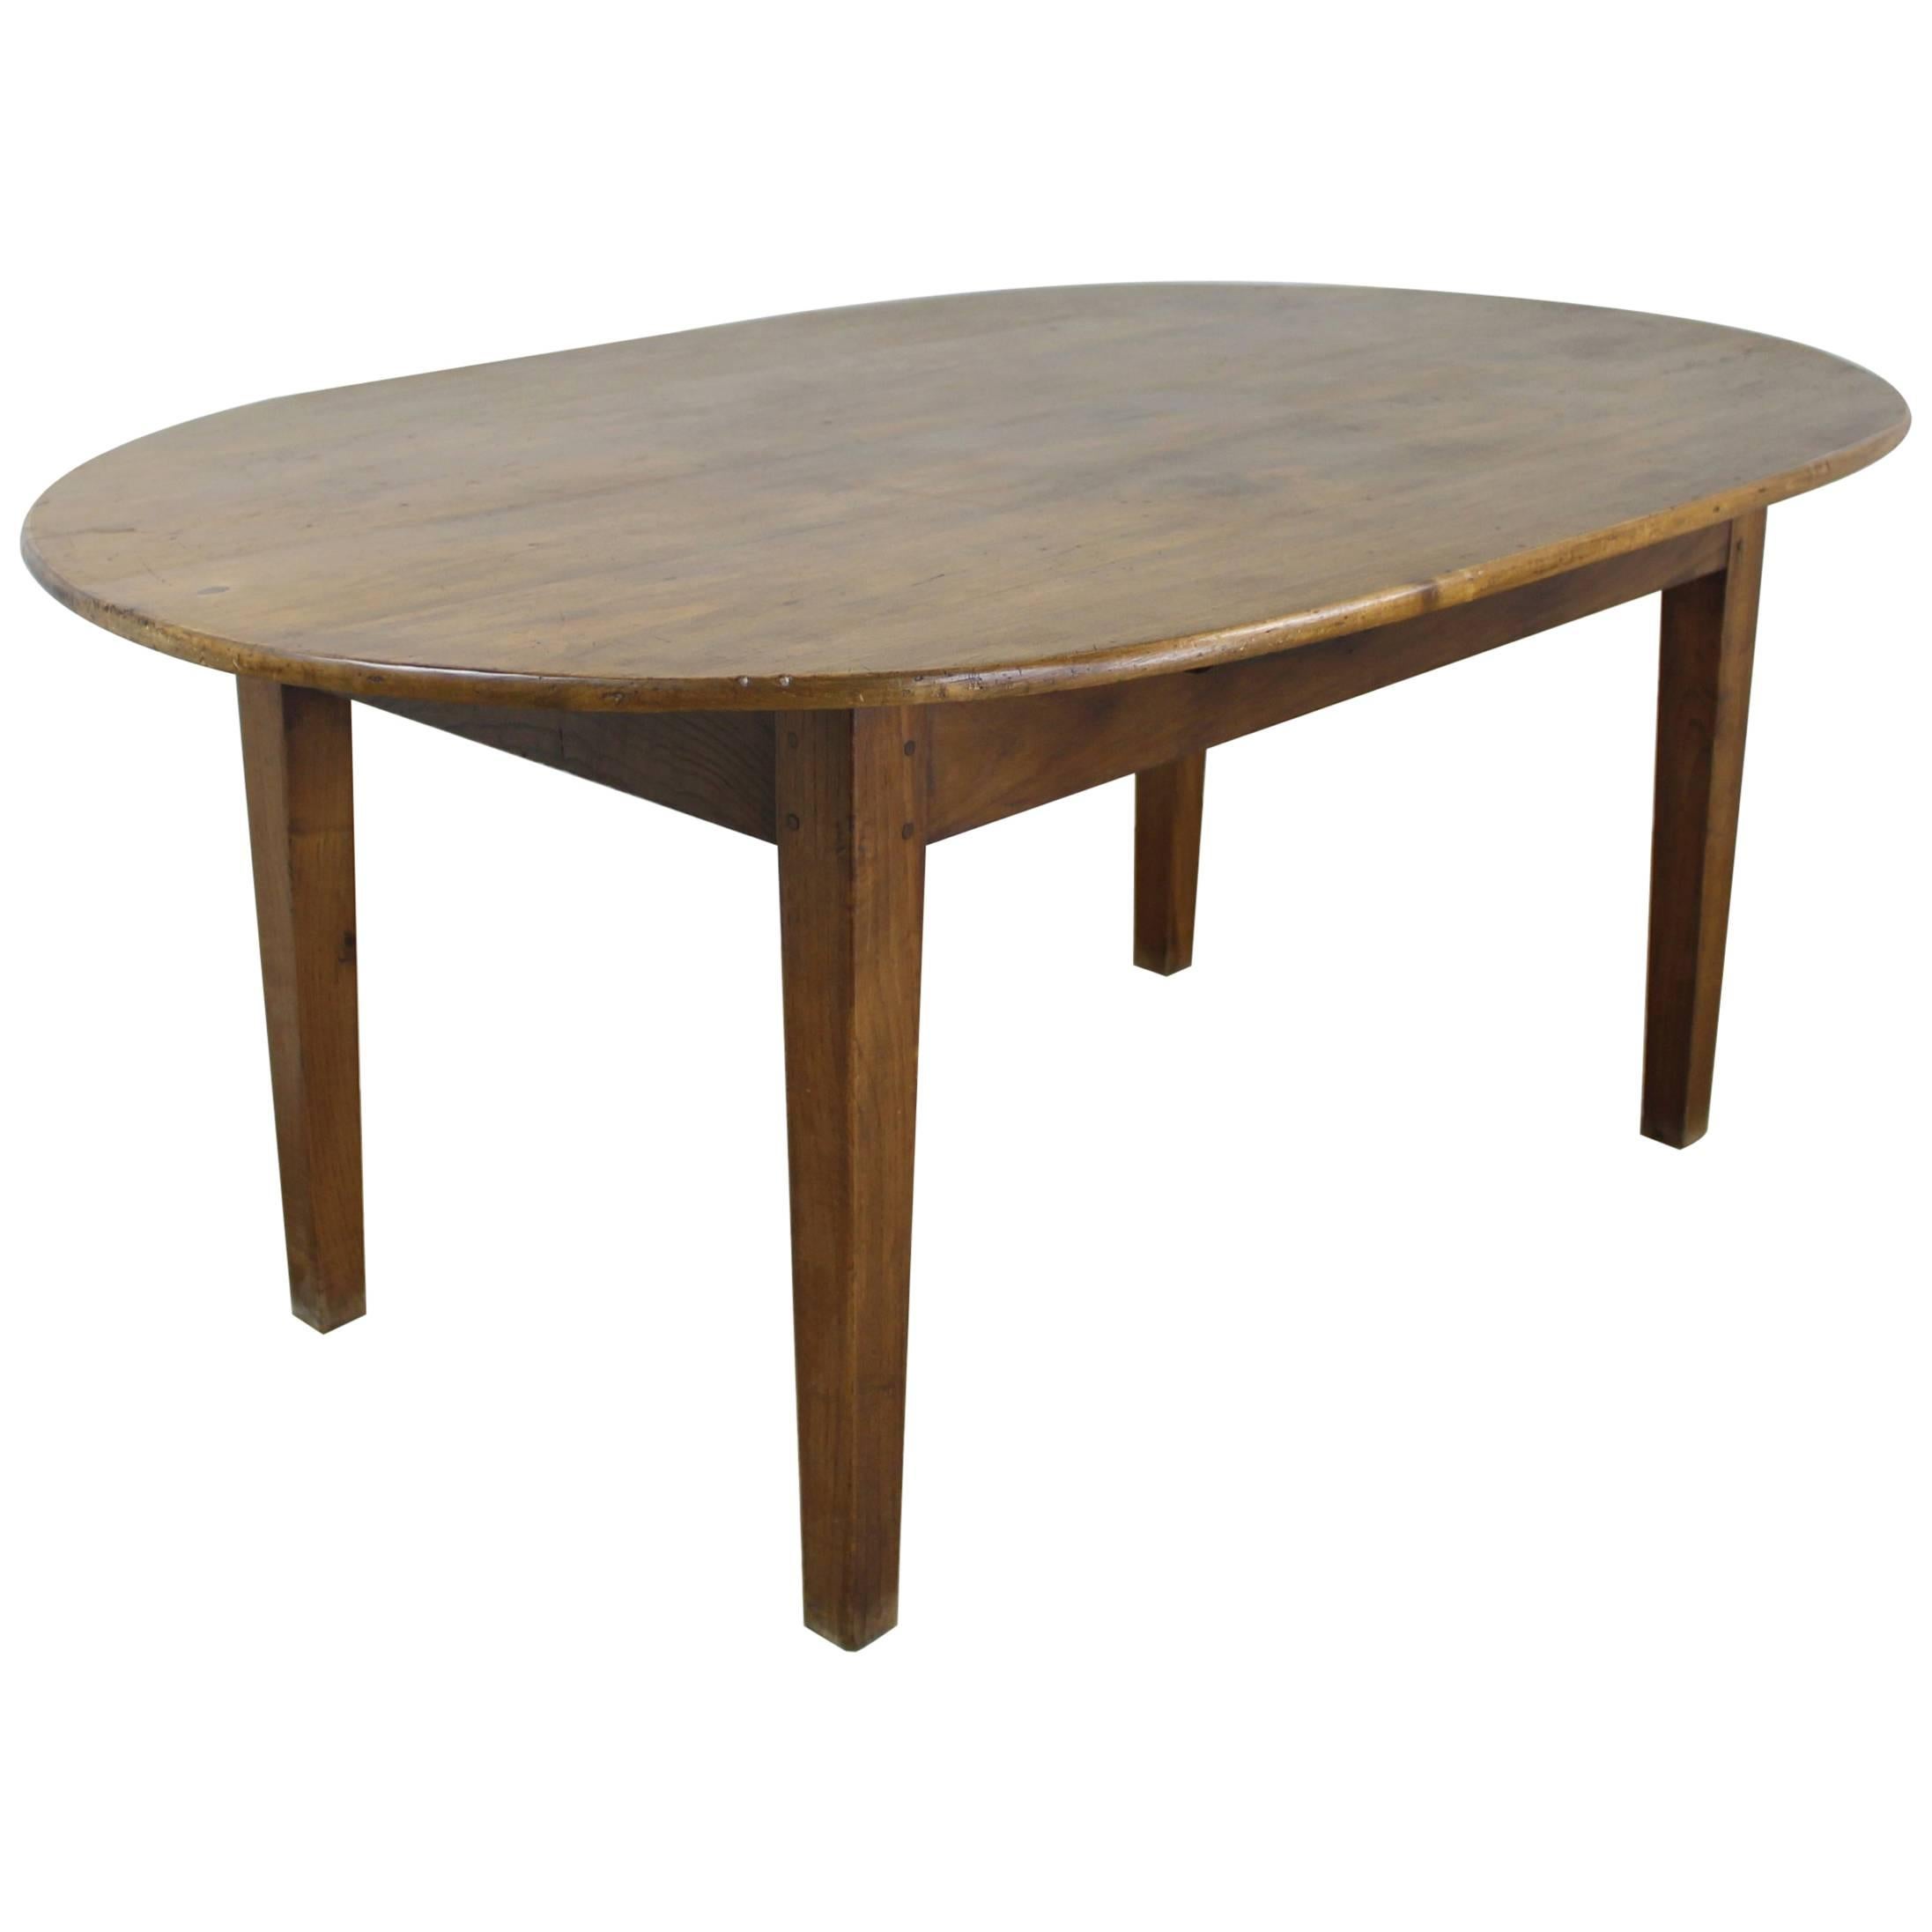 Antique Oval Poplar Dining Table with Oak Base